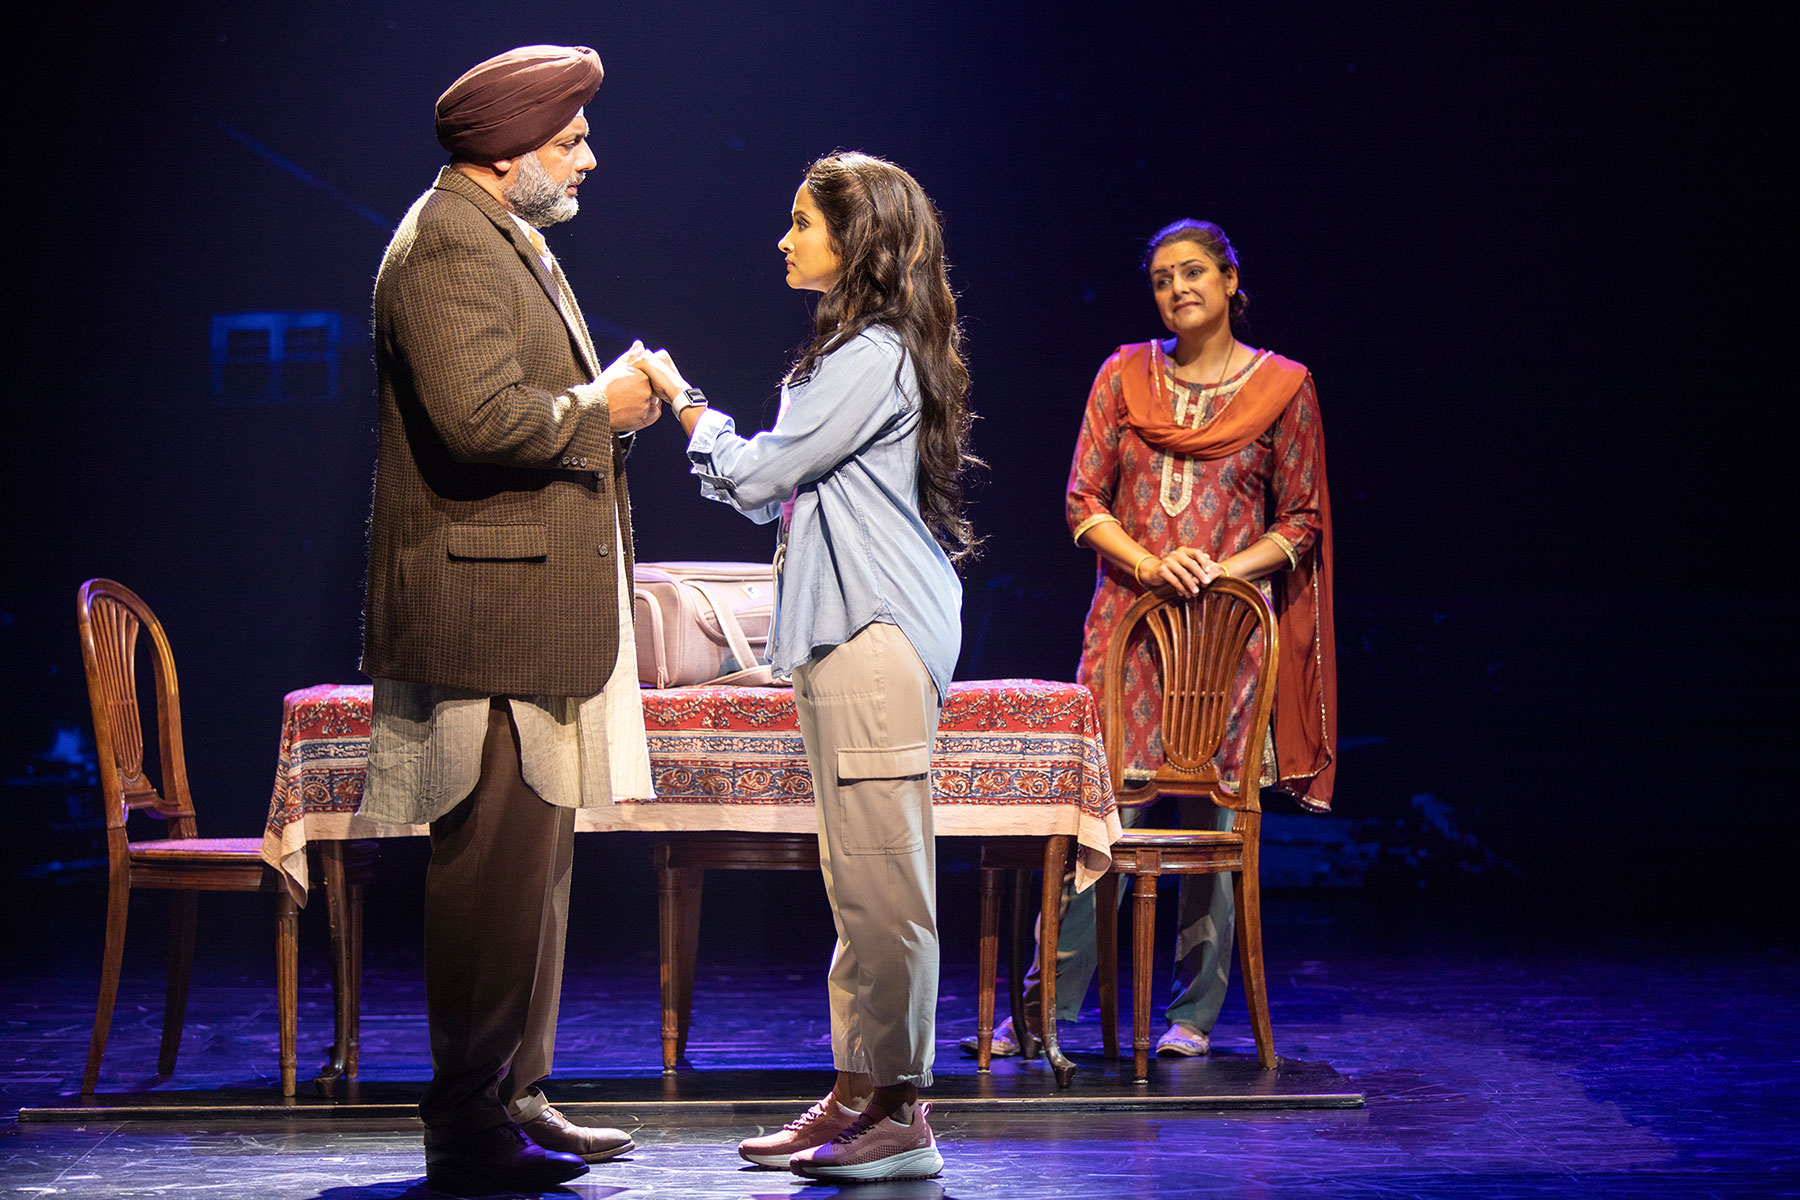  (from left) Irvine Iqbal as Baldev, Shoba Narayan as Simran, and Rupal Pujara as Lajjo in Come Fall in Love – The DDLJ Musical, 2022. Photo by Jim Cox.